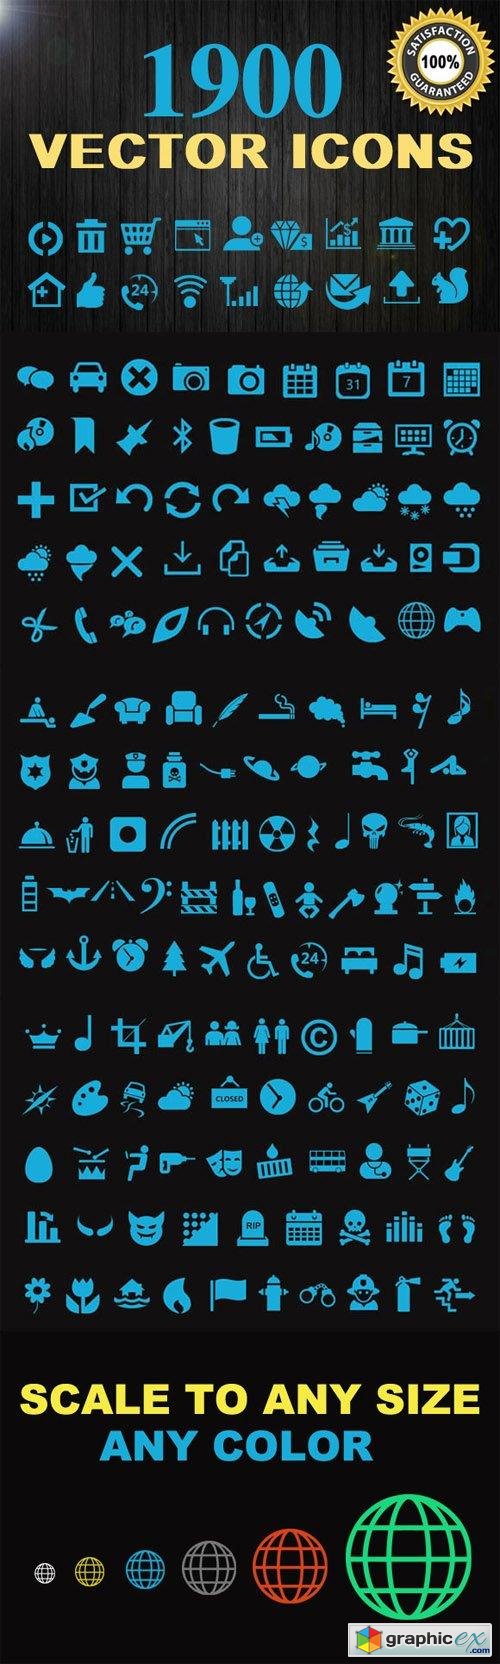 1900 Vector Icons 68803